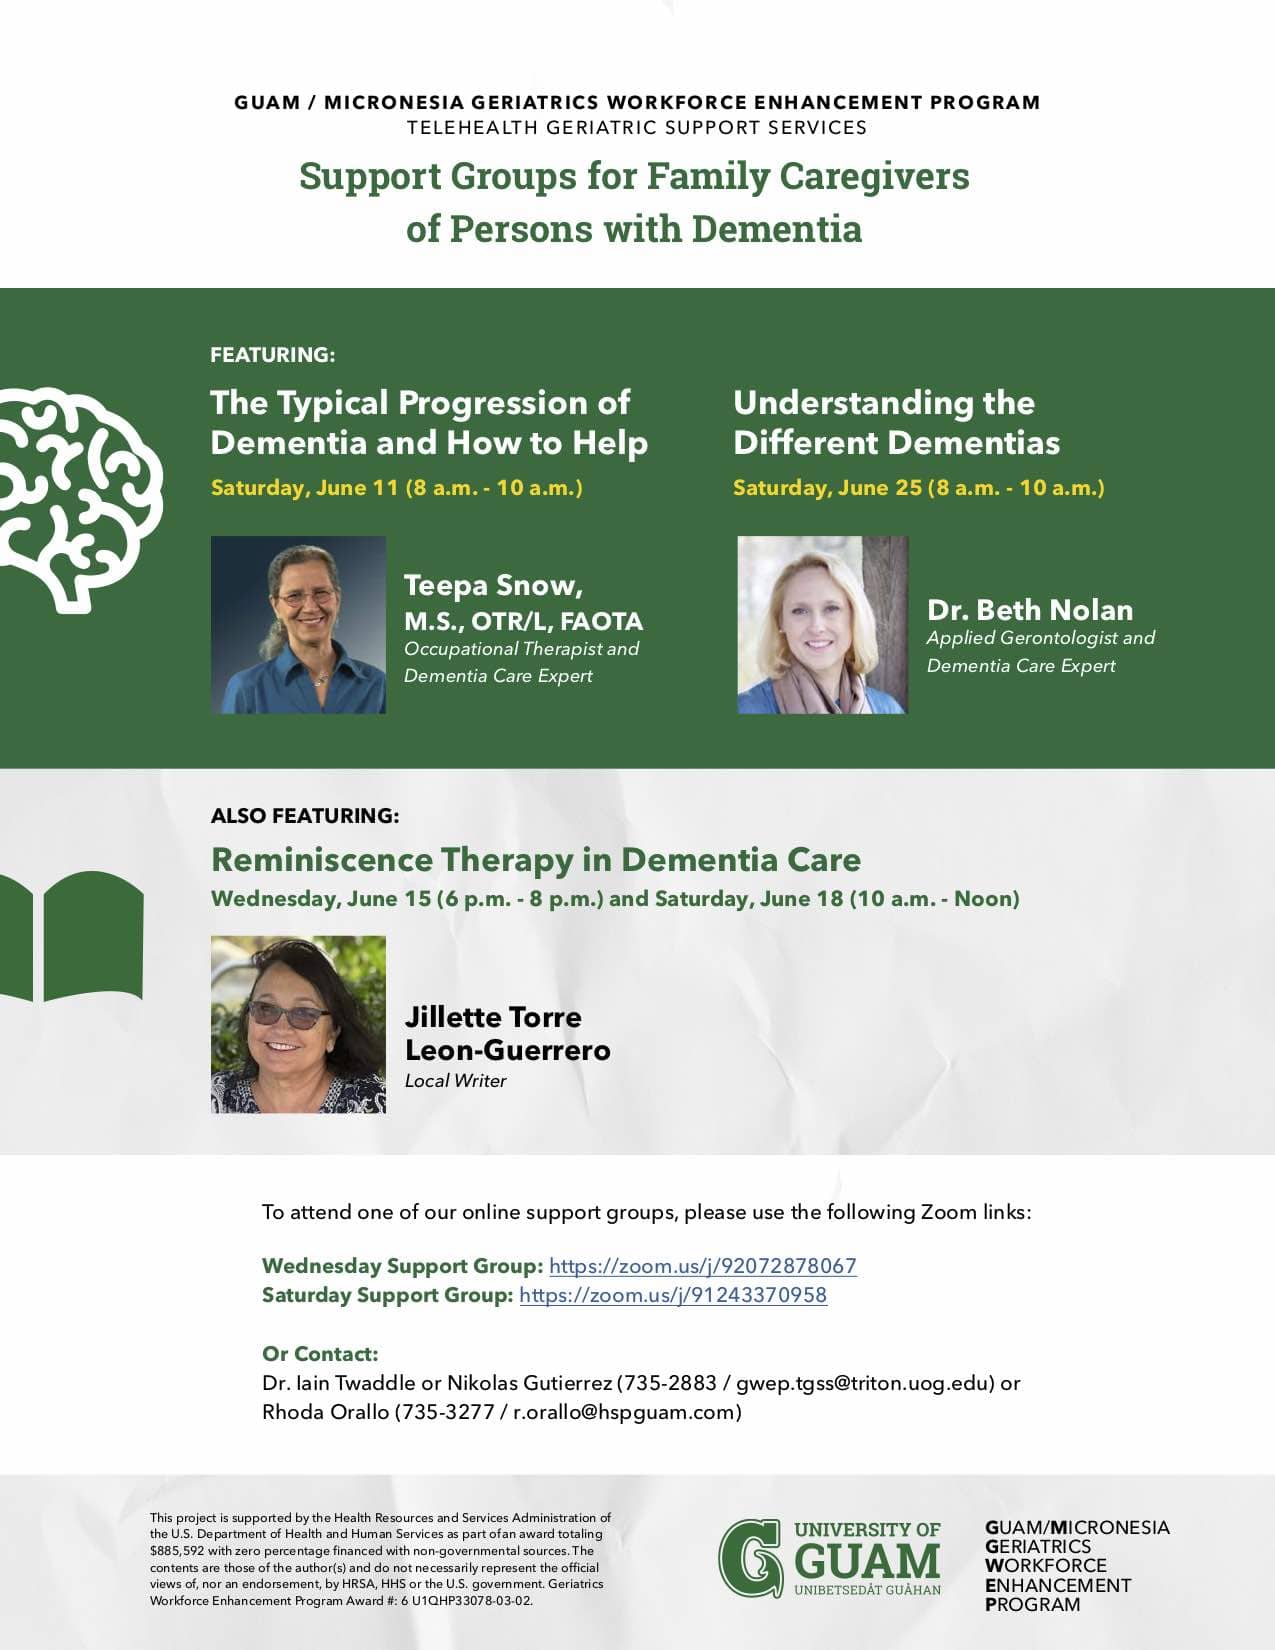 Dementia Support Group: “Understanding the Different Dementias” with Dr. Beth Nolan